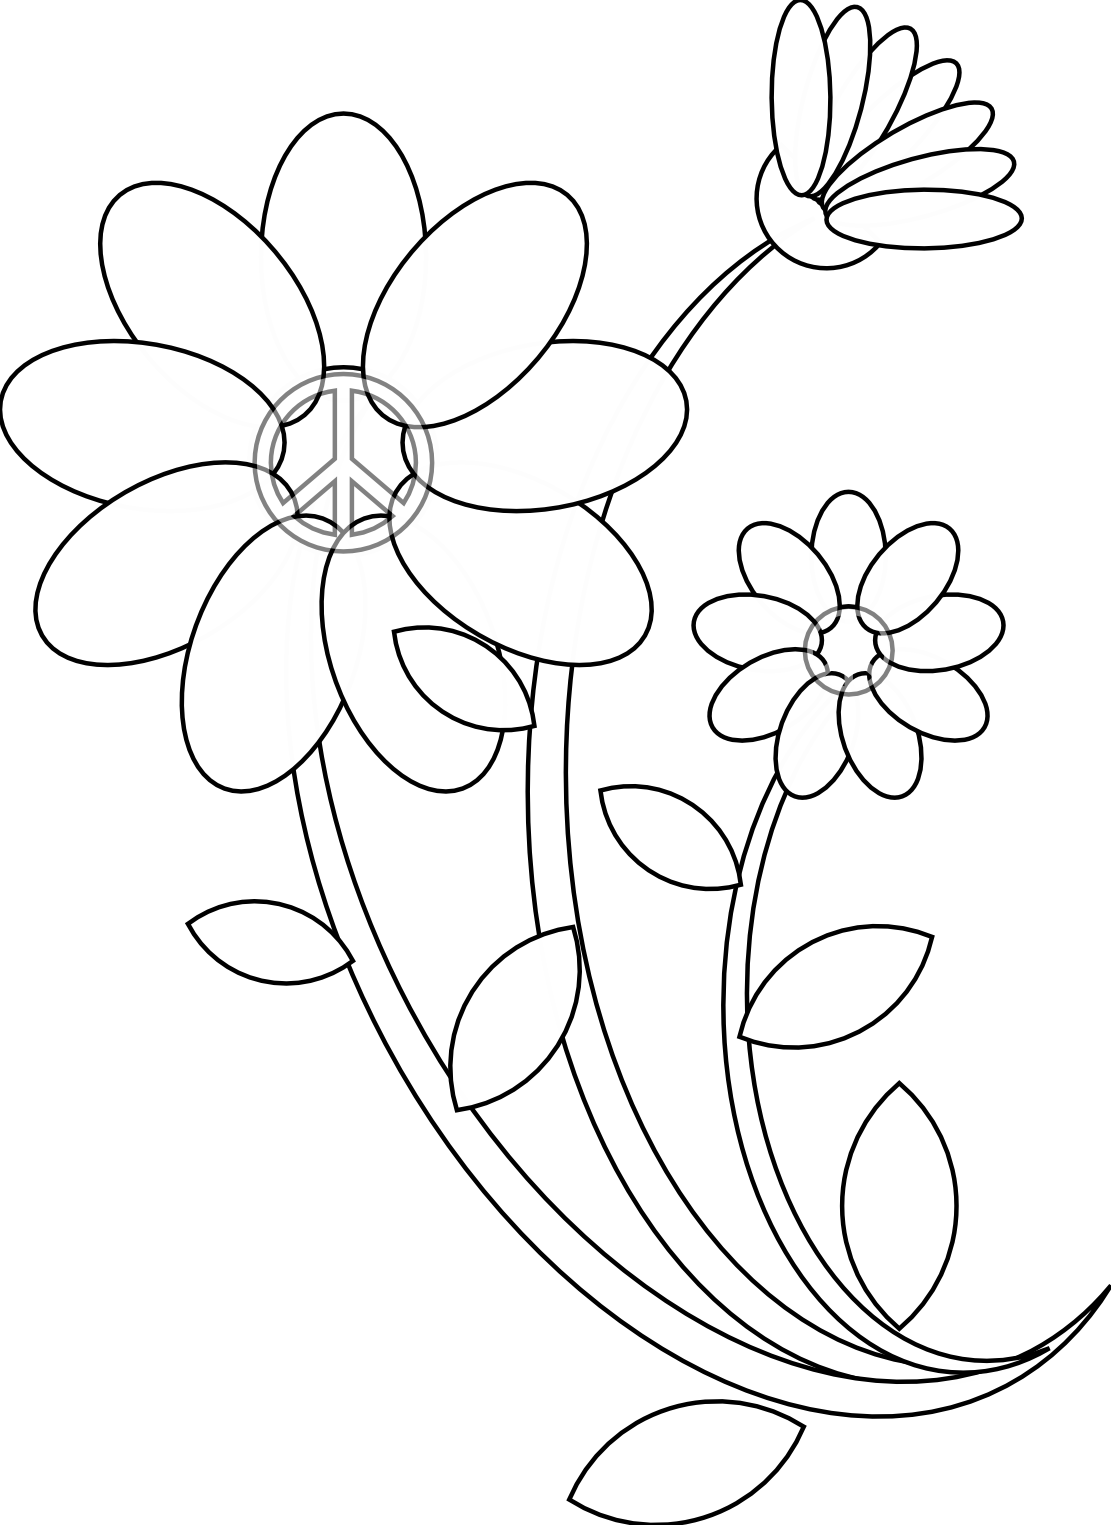 line of roses clipart - photo #45